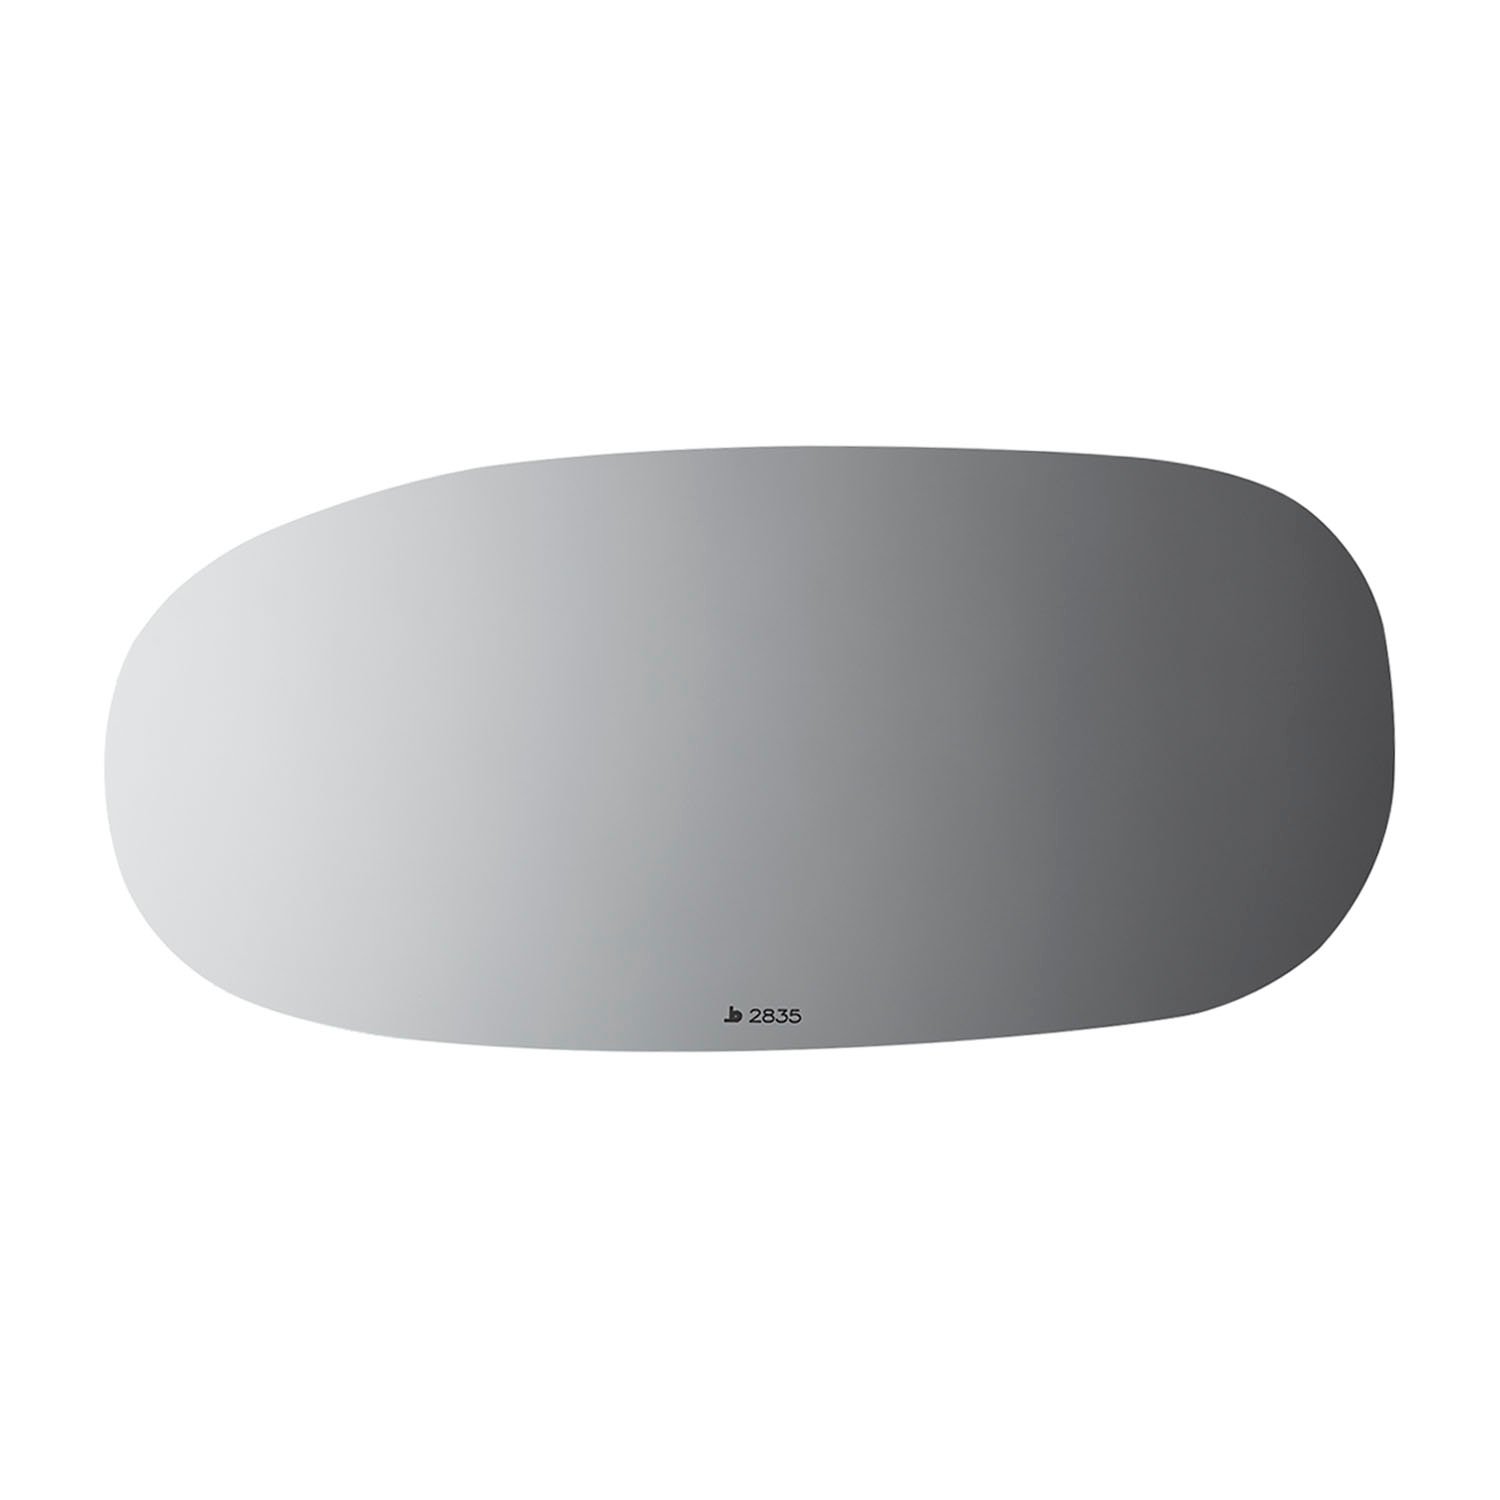 2835 SIDE VIEW MIRROR